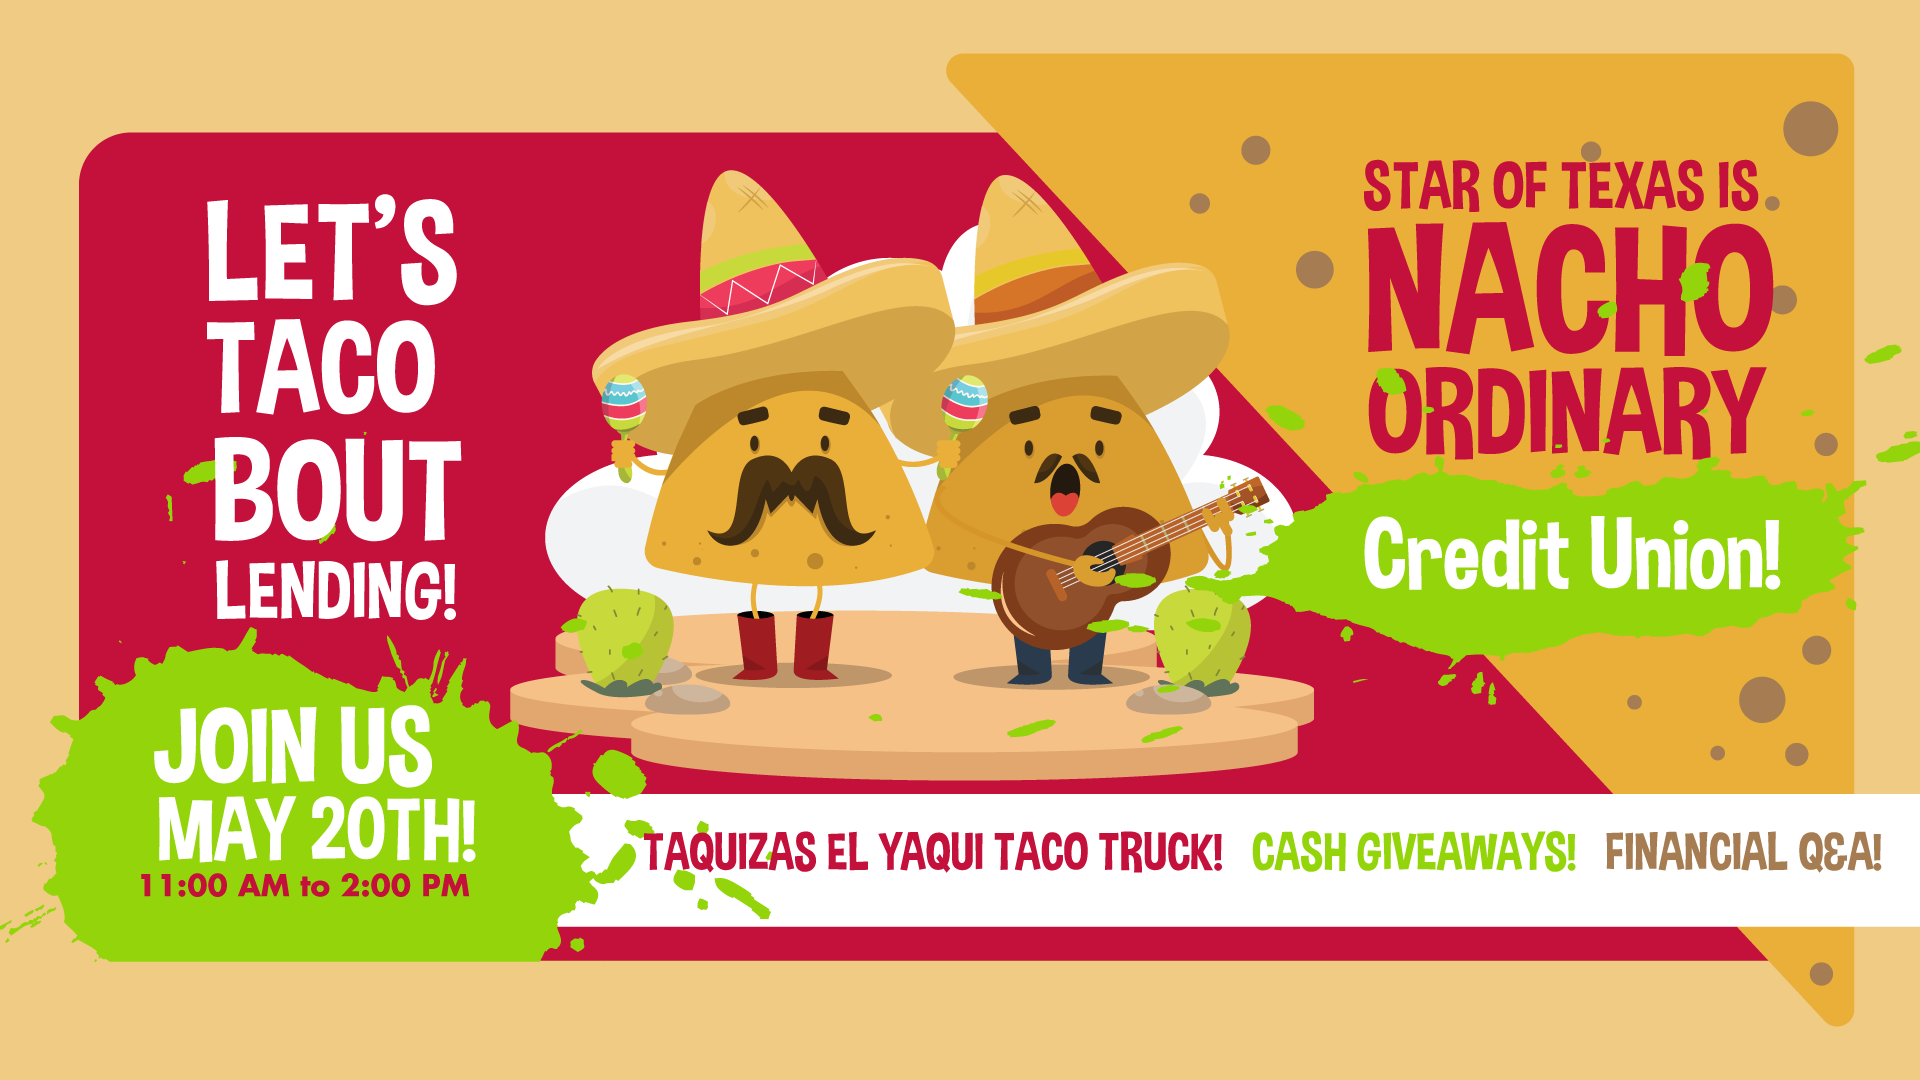 Graphic of two tortilla chips with Let's Taco Bout Lending and a May 20th promotion